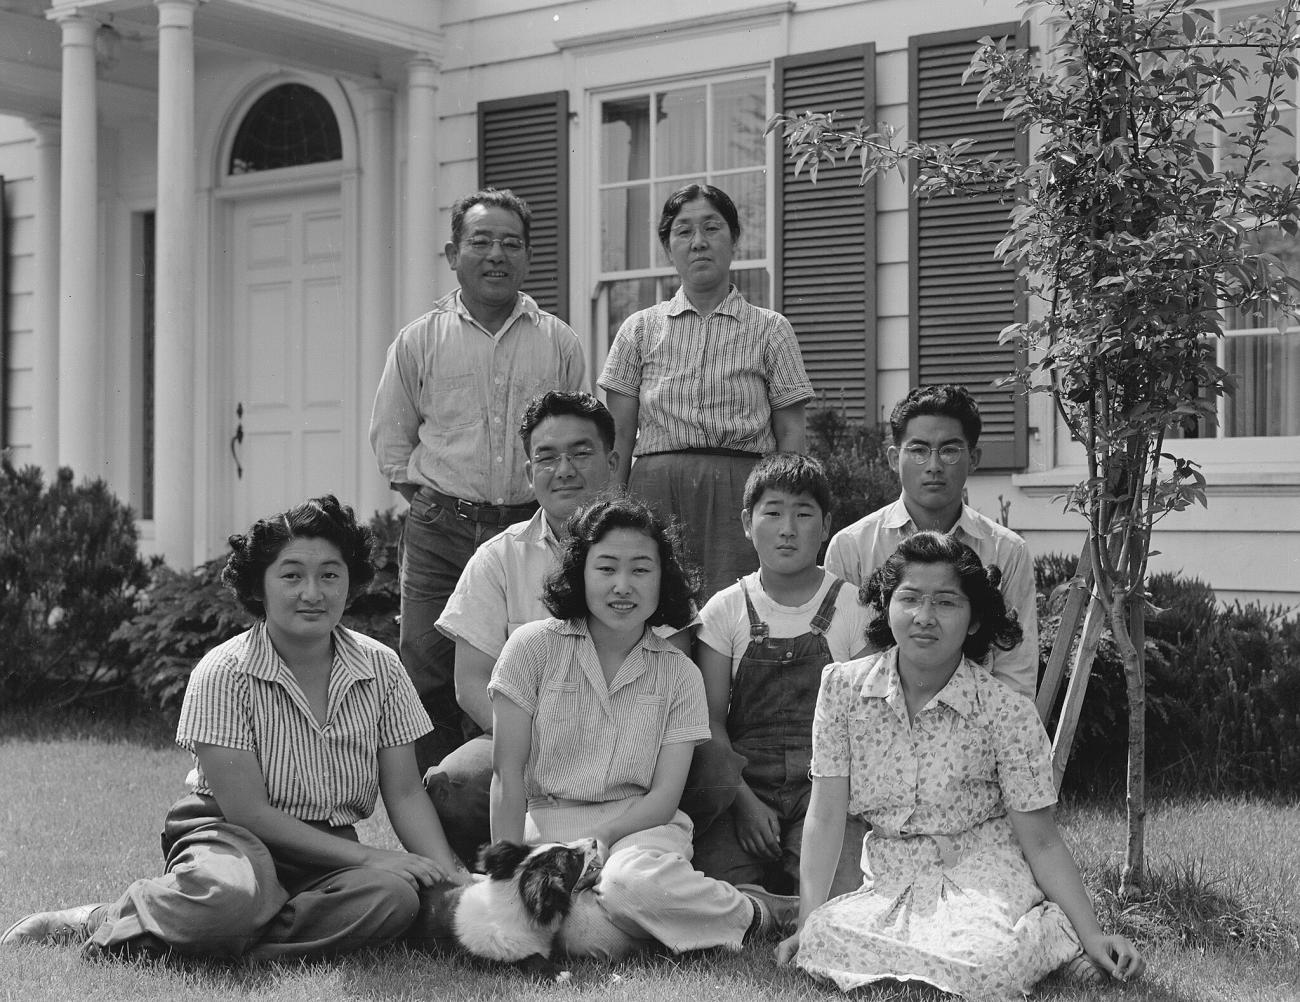 The Shibuya family in front of their home in California.